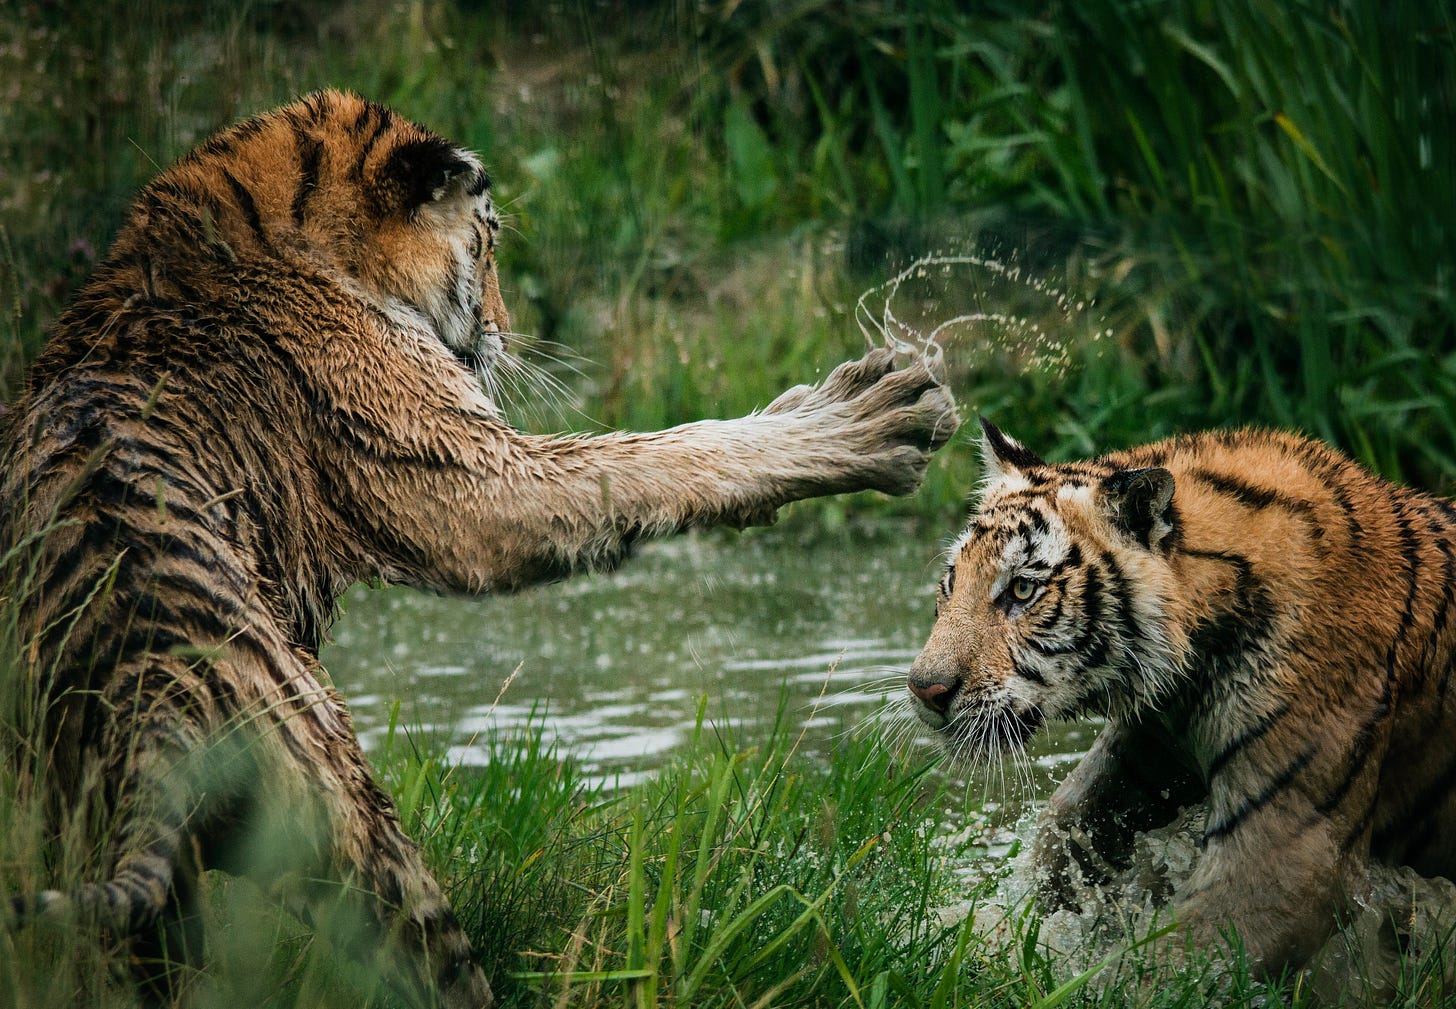 Two tigers in the water surrounded by grass fighting.